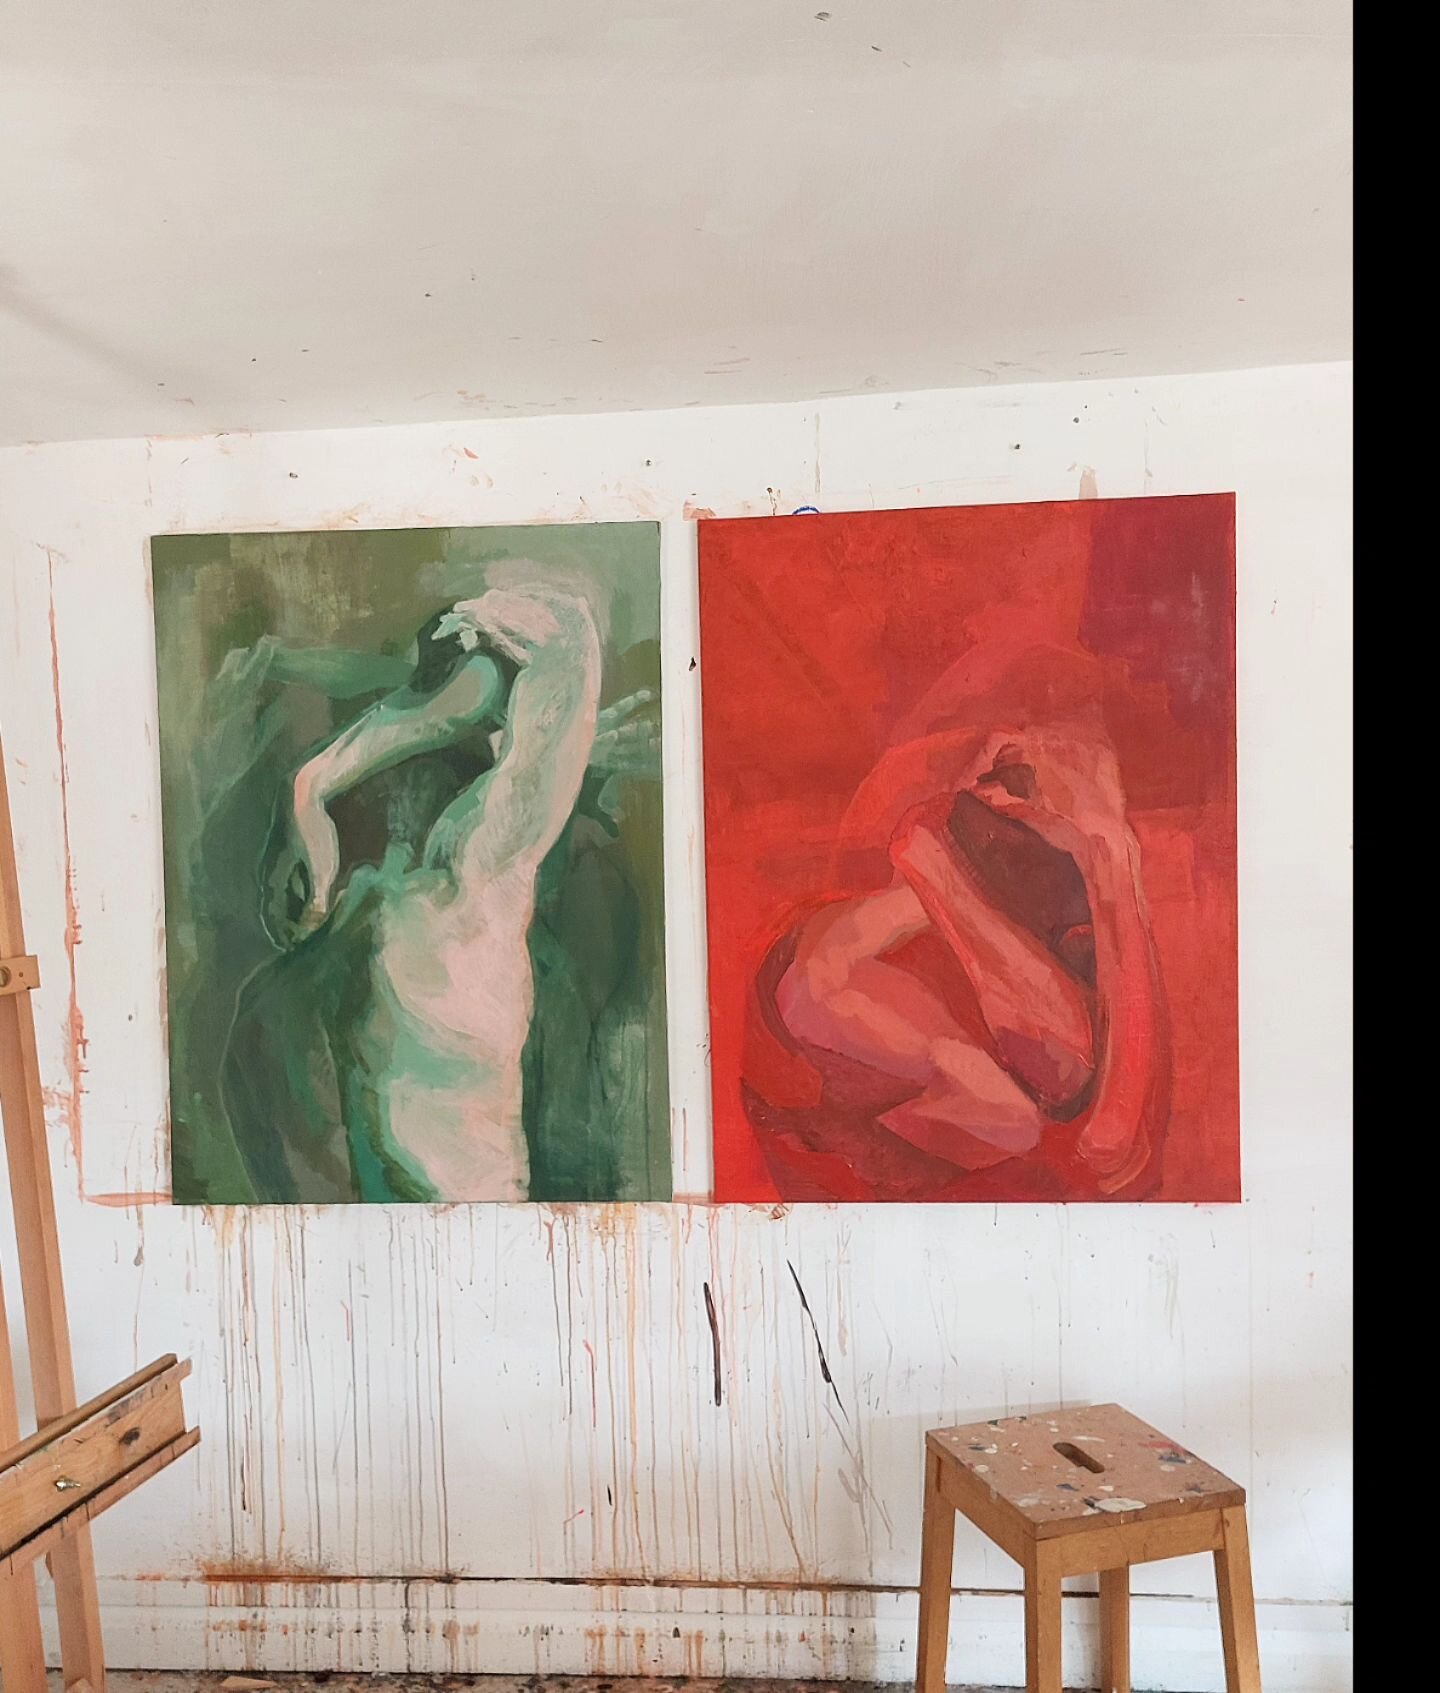 #currentview #wip #contemporarypainting #red #green #colour #illusion #qualia #today #artstudio #britartist #complementarycolours #figure #figurativeart #ivattsart